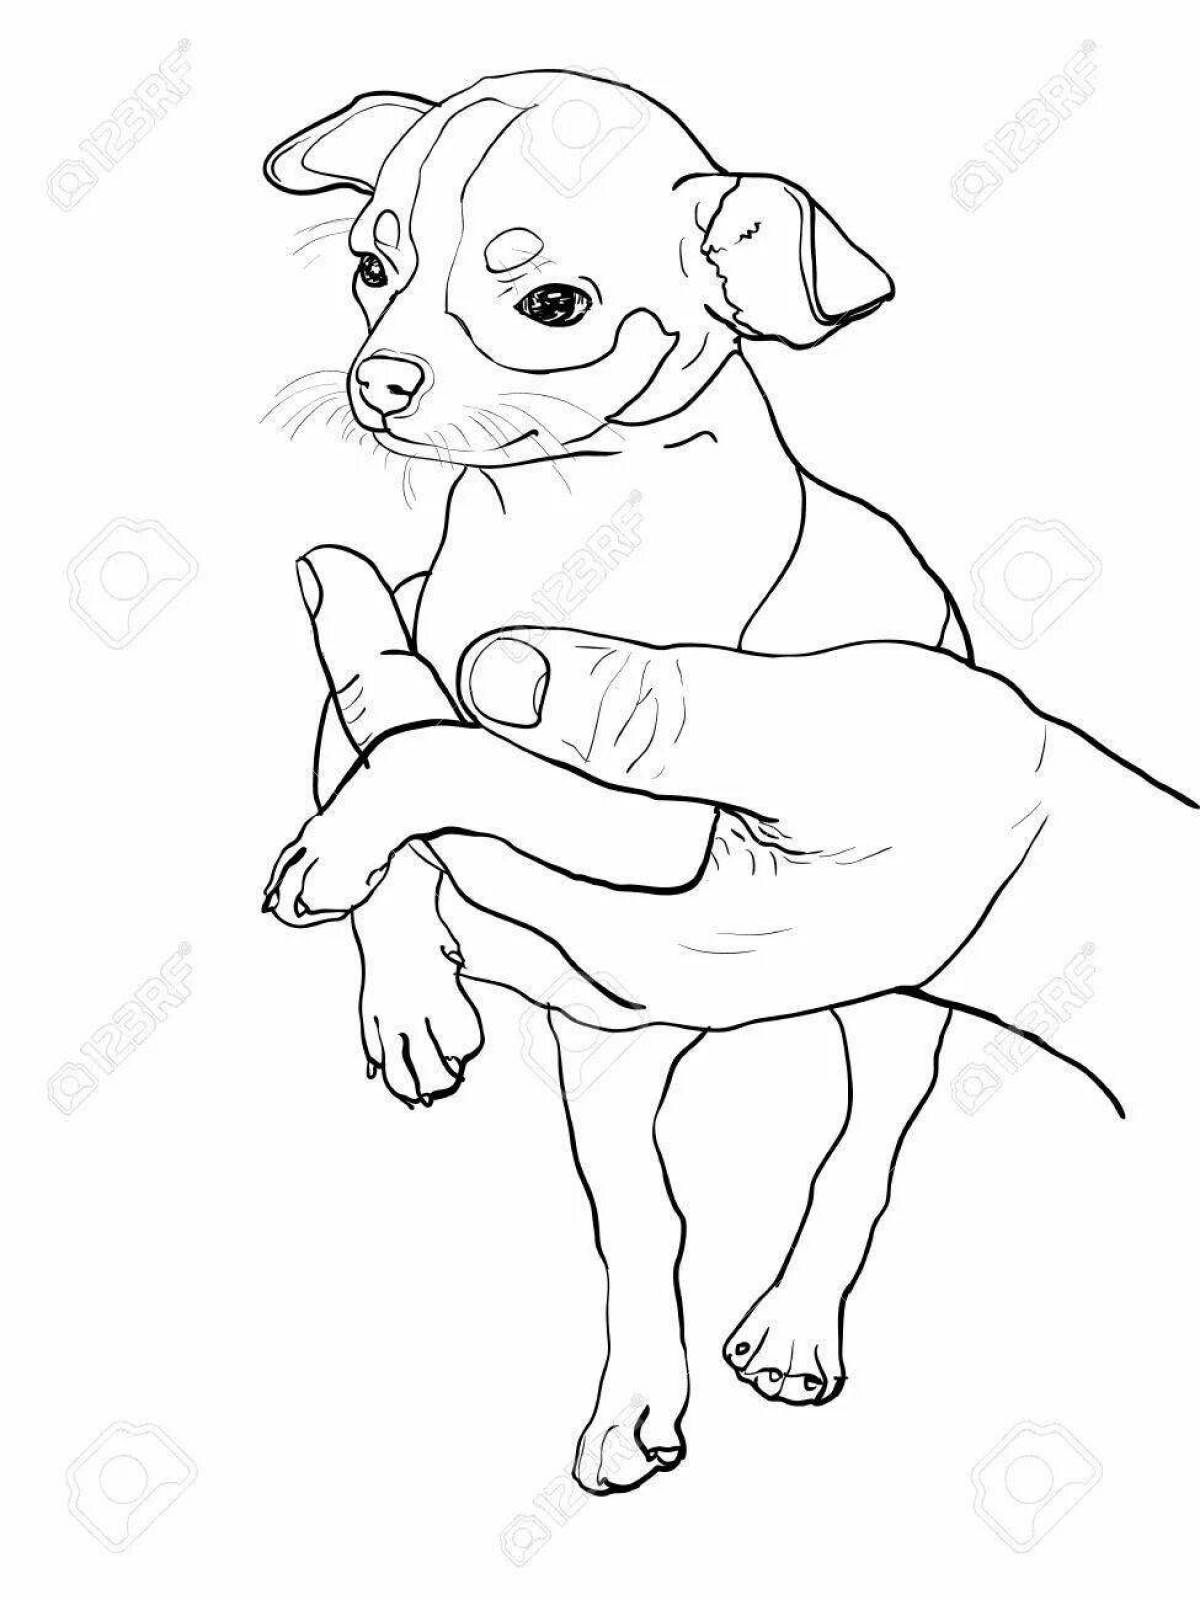 Coloring page brave chihuahua